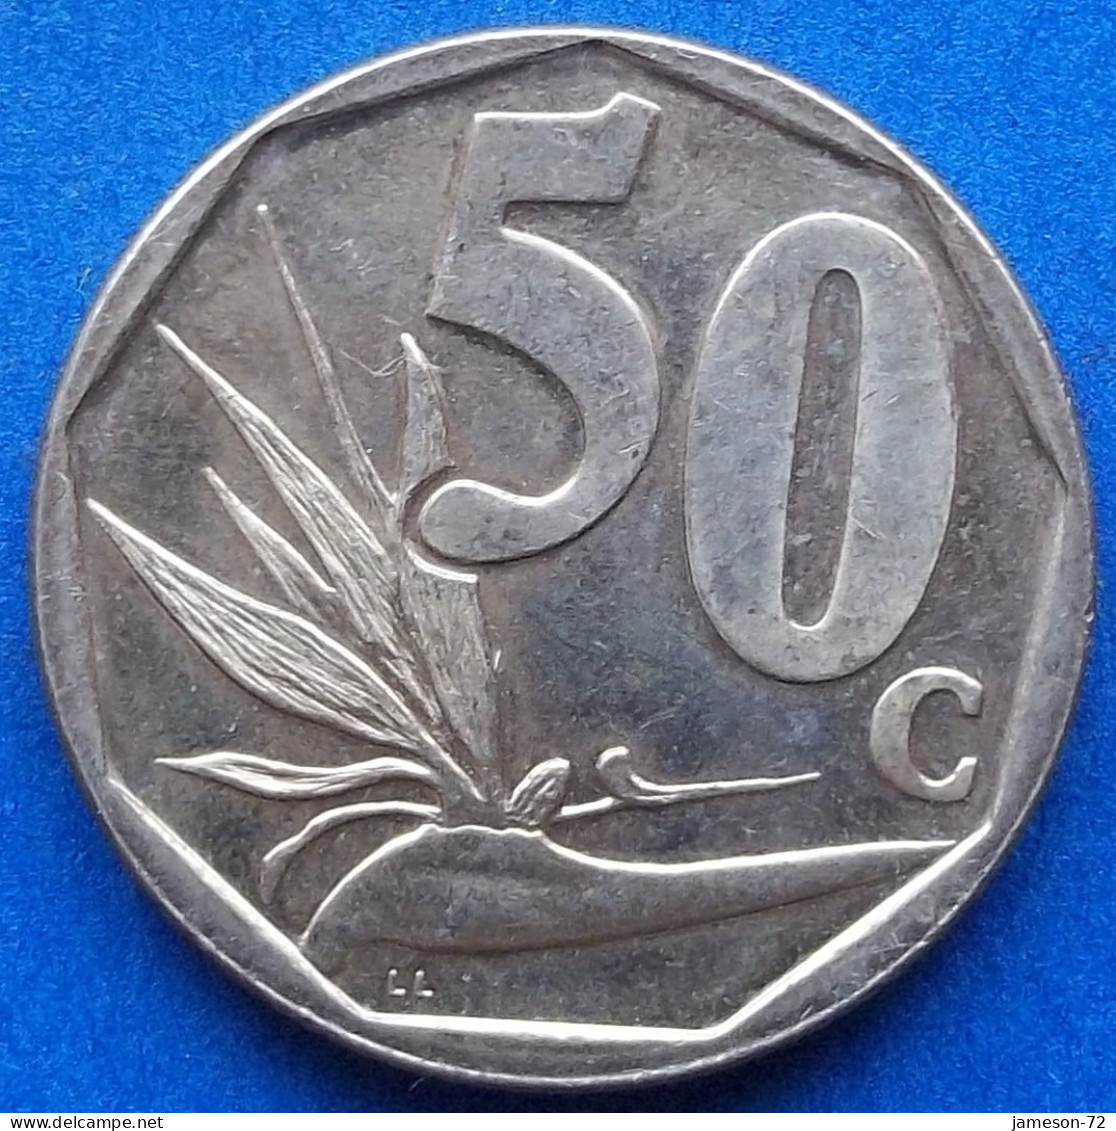 SOUTH AFRICA - 50 Cents 2016 "Strelizia" Republic (1961) - Edelweiss Coins - South Africa